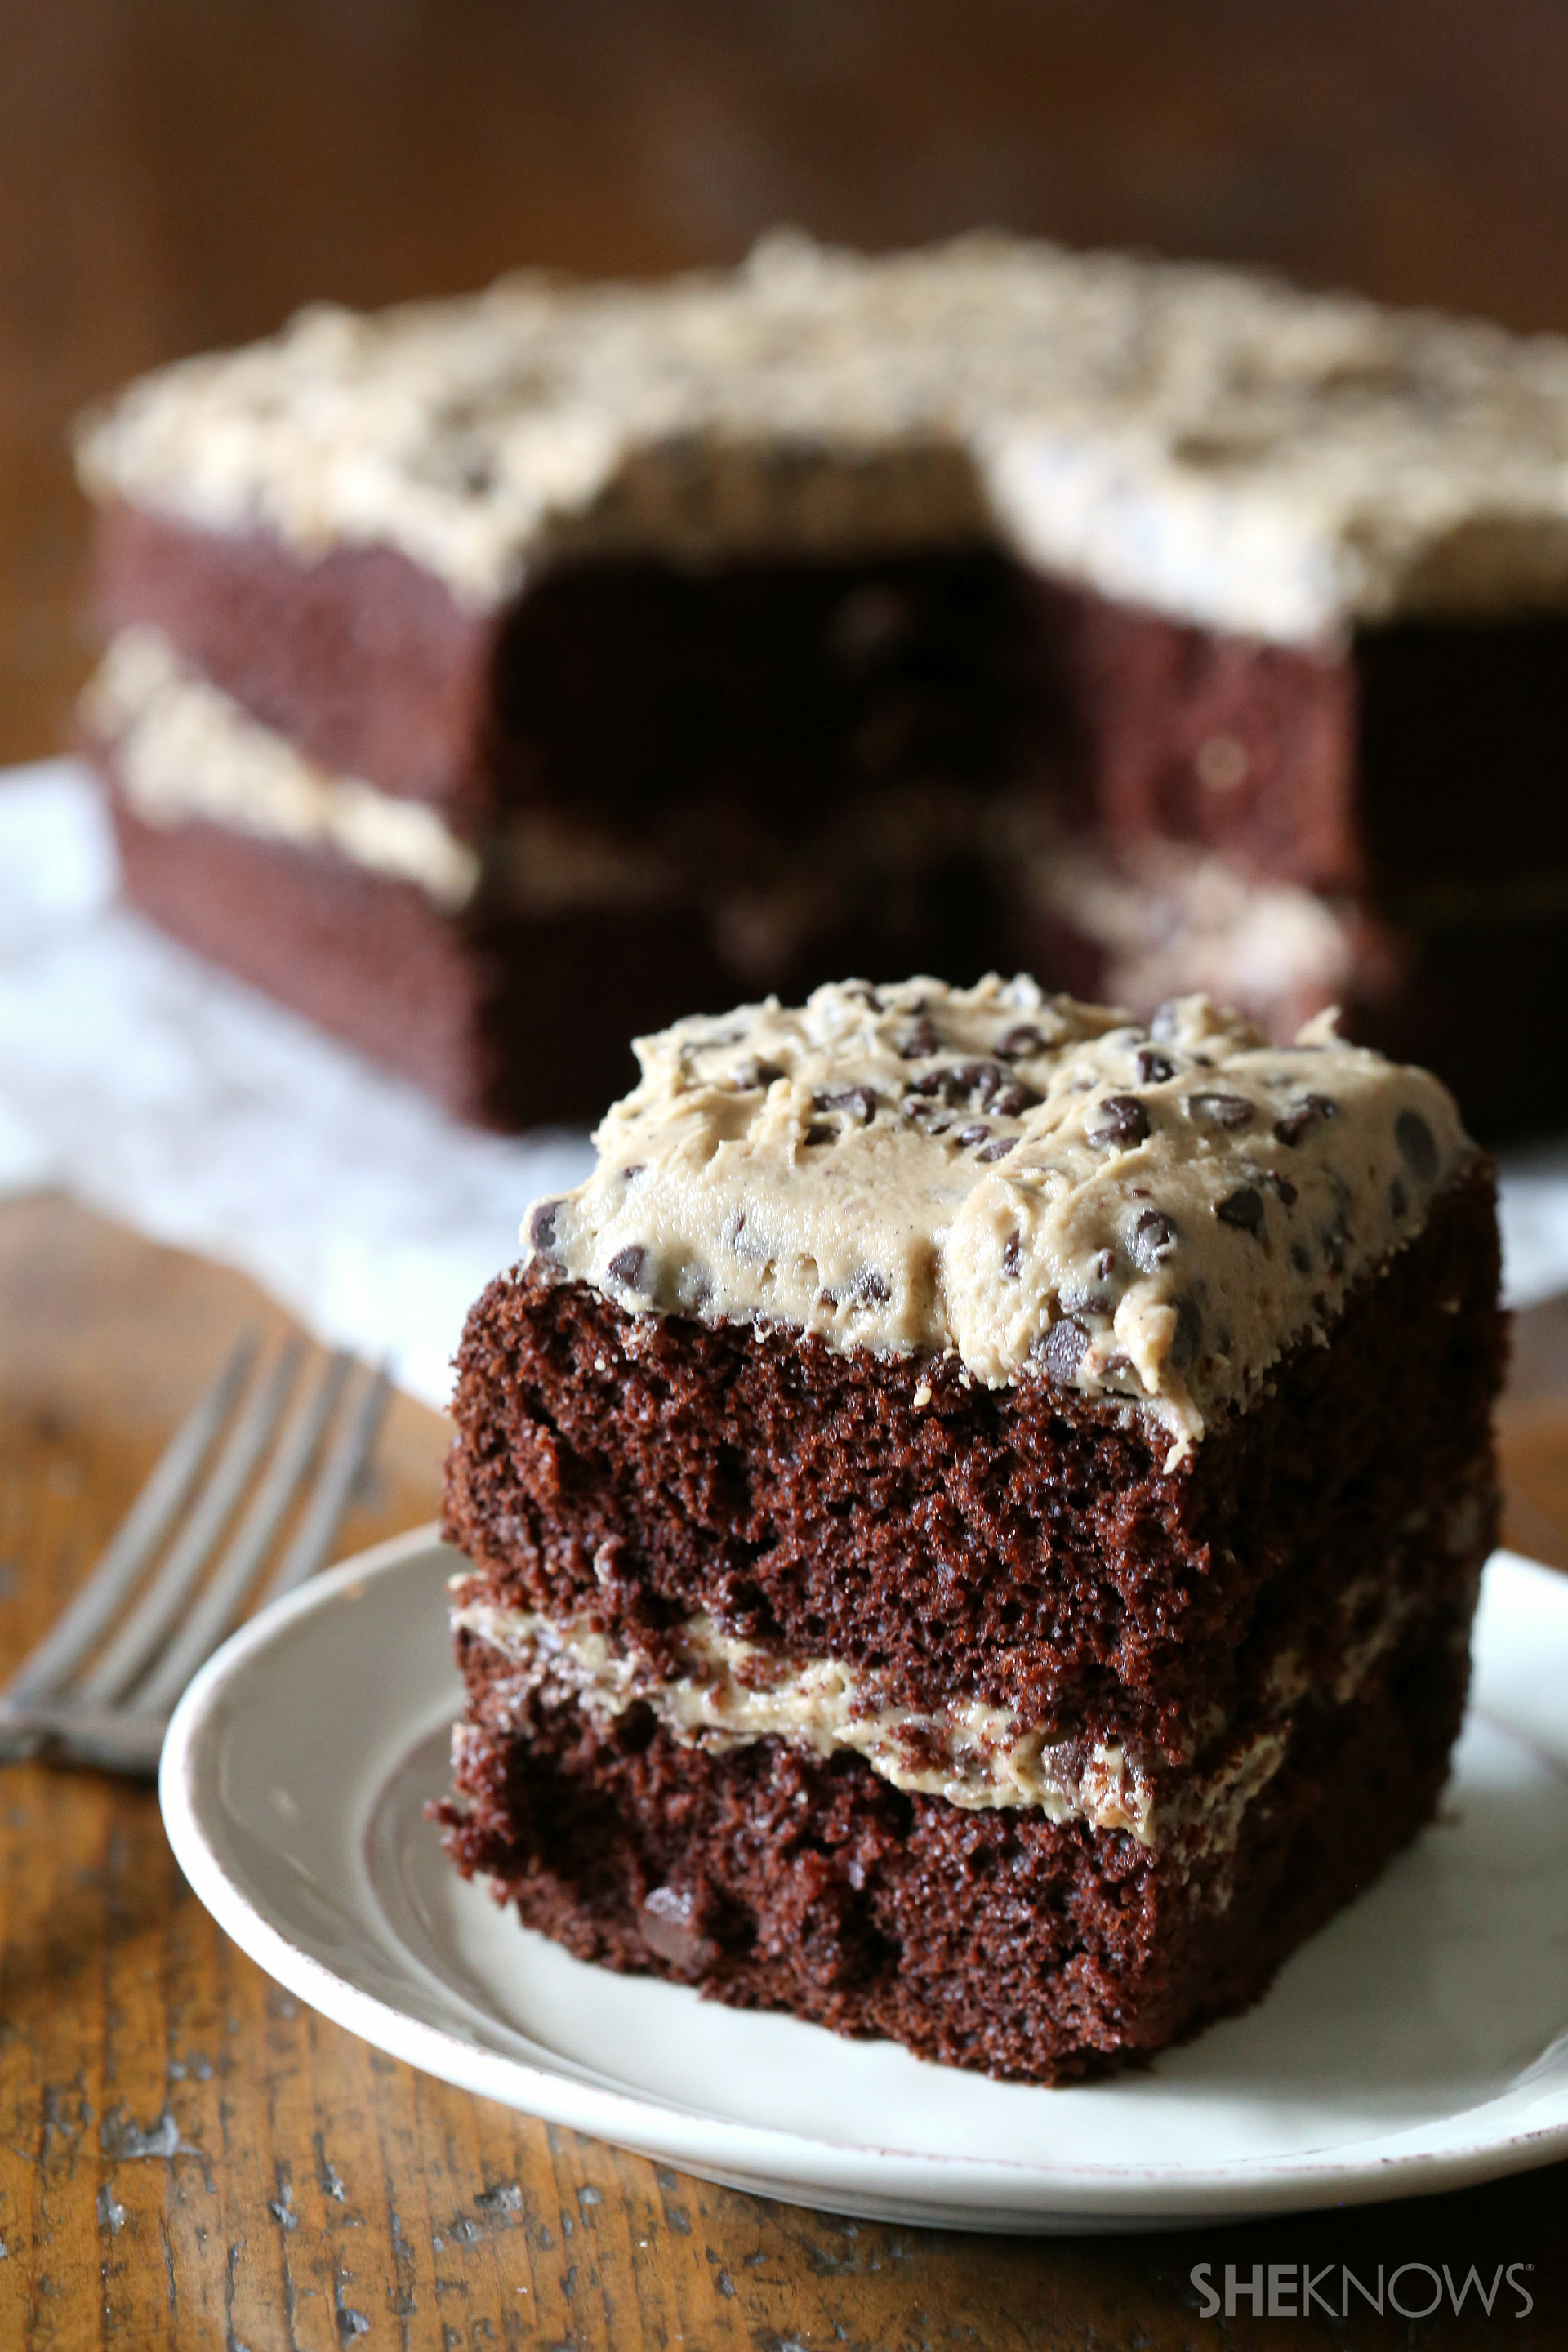 Cookie dough frosted chocolate cake is twice the dessert fun